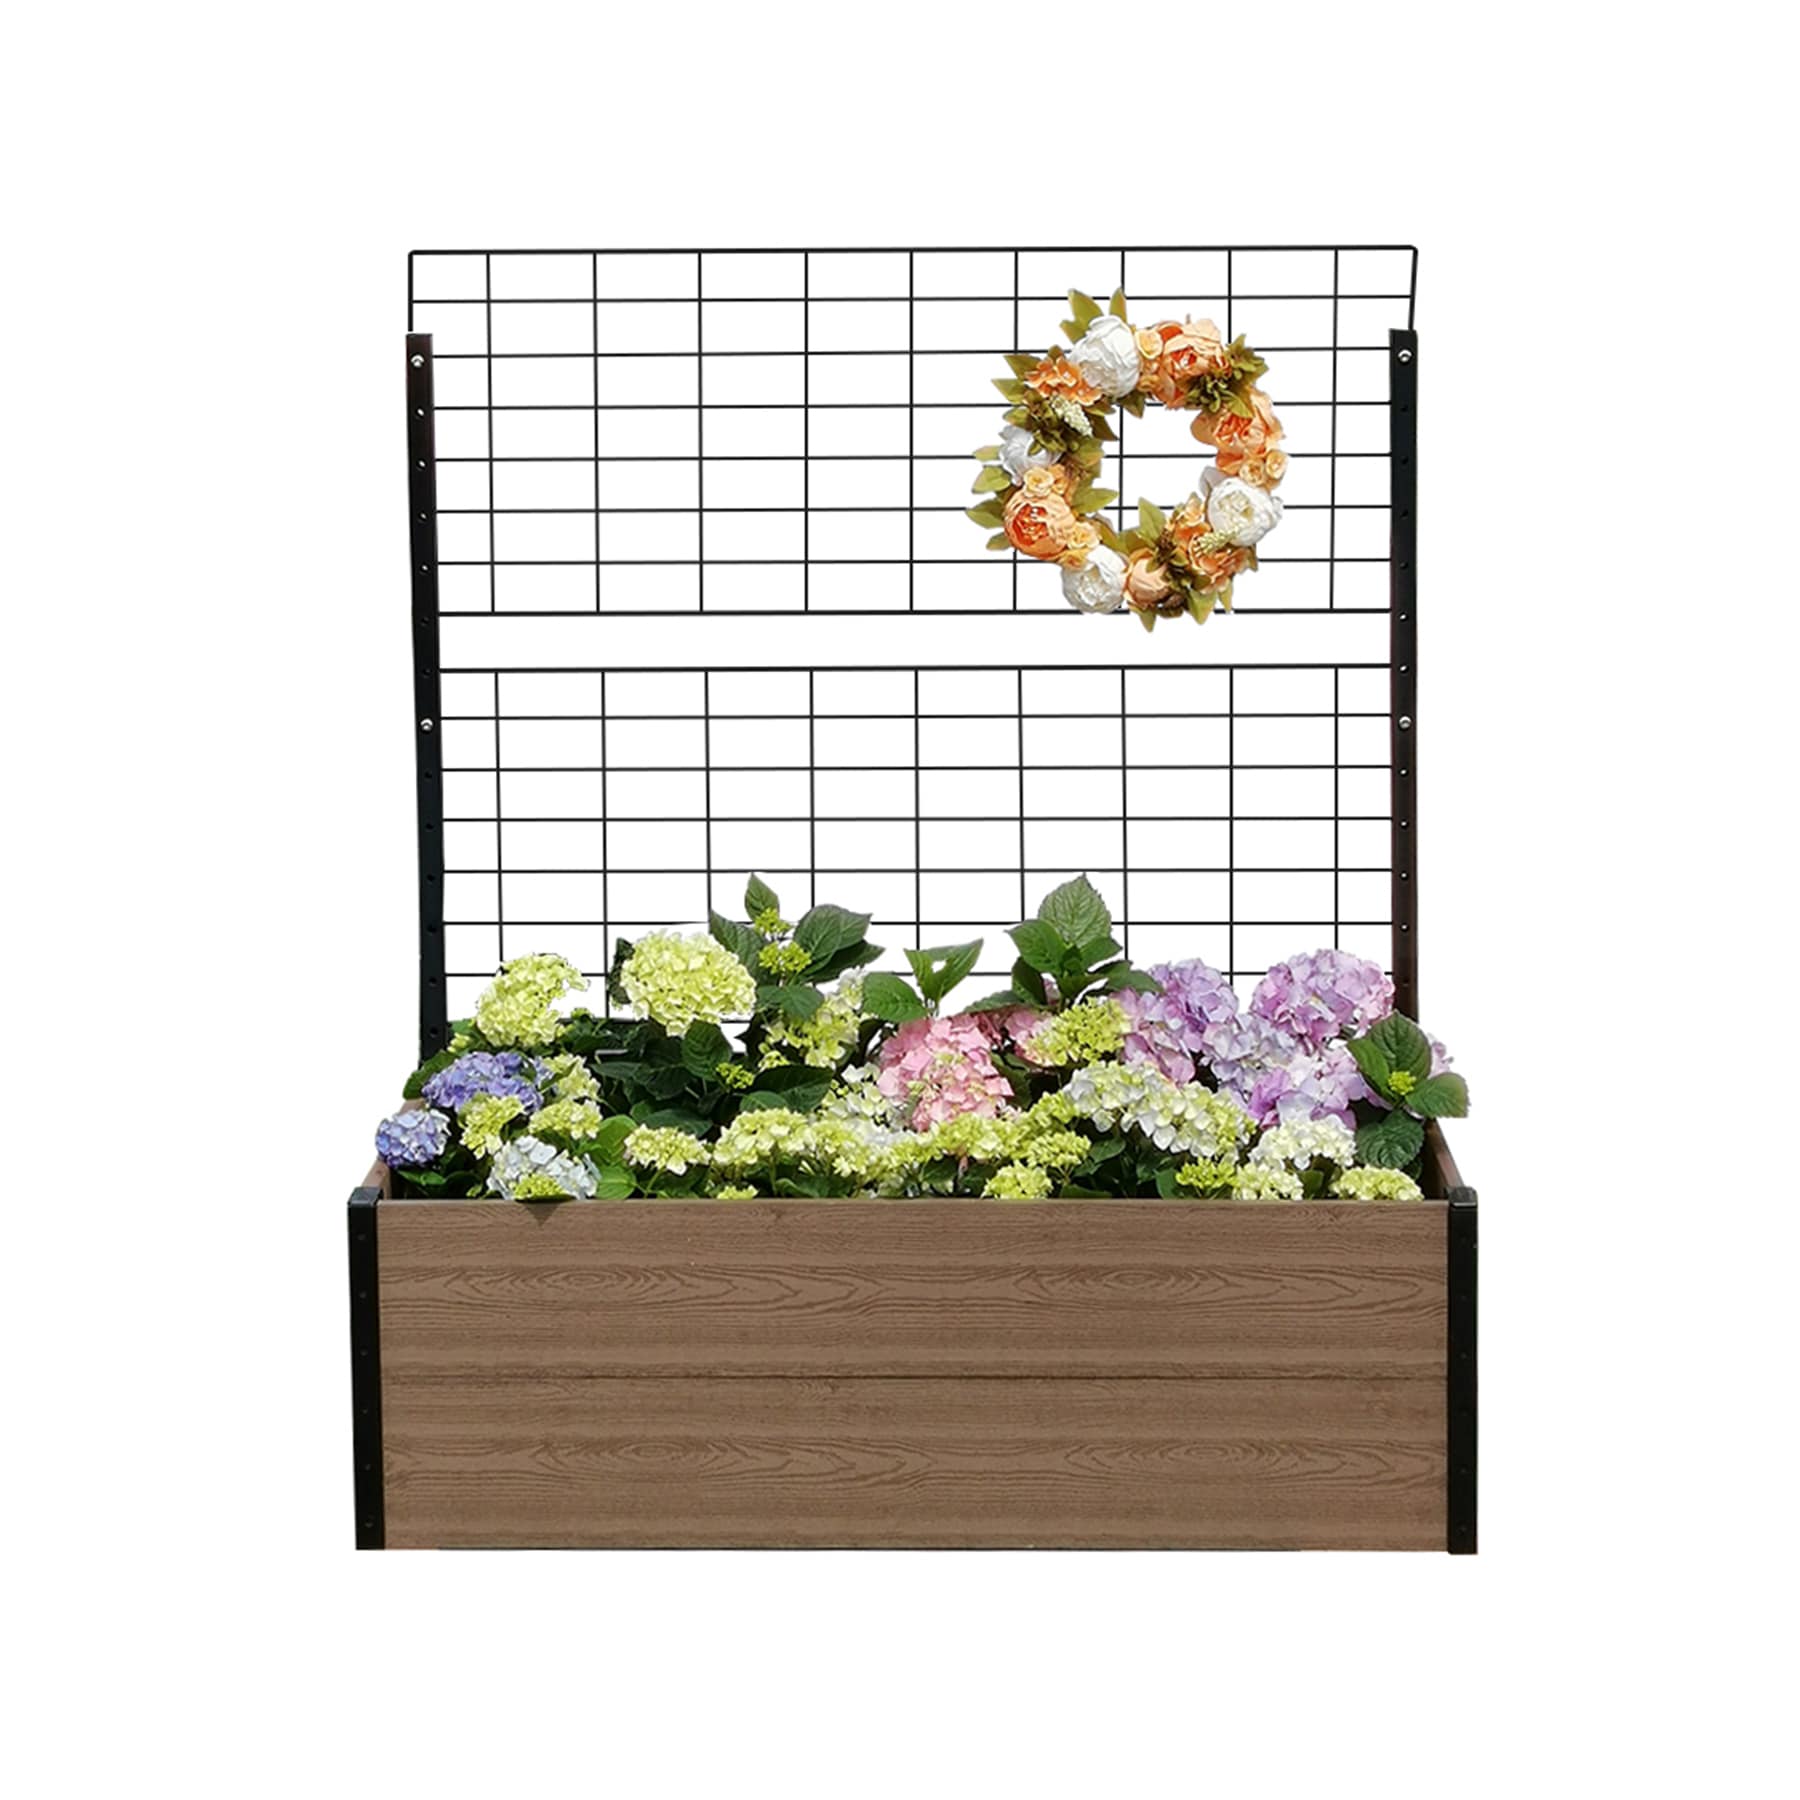 Everbloom 24-in W x 45-in H 47-in Beds Garden the Raised Bed L Raised at department x in Garden Brown